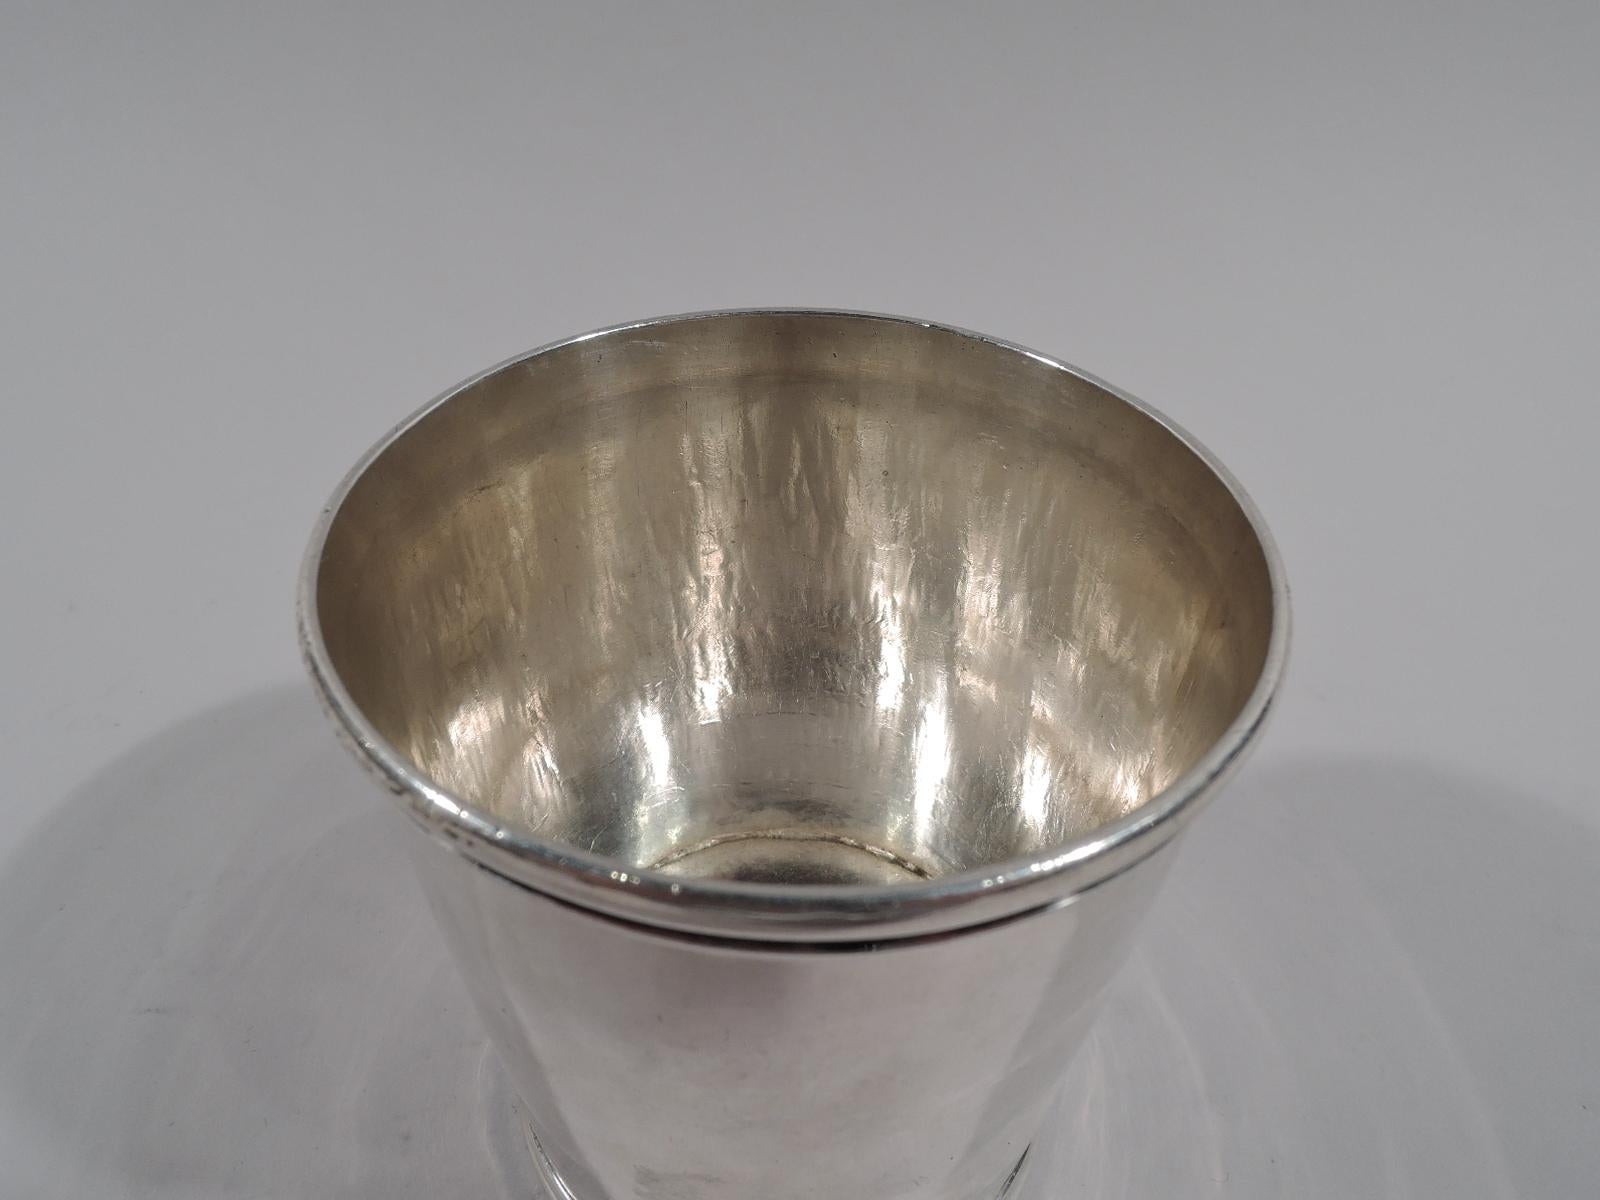 American coin silver mint julep cup. Made by George G. Schoolfield in Columbia, Missouri, circa 1850. Straight and tapering sides and molded rim and foot. Handwork visible on interior. Marked “G.G.Schoolfield.Col.Mo”. Weight: 4 troy ounces.